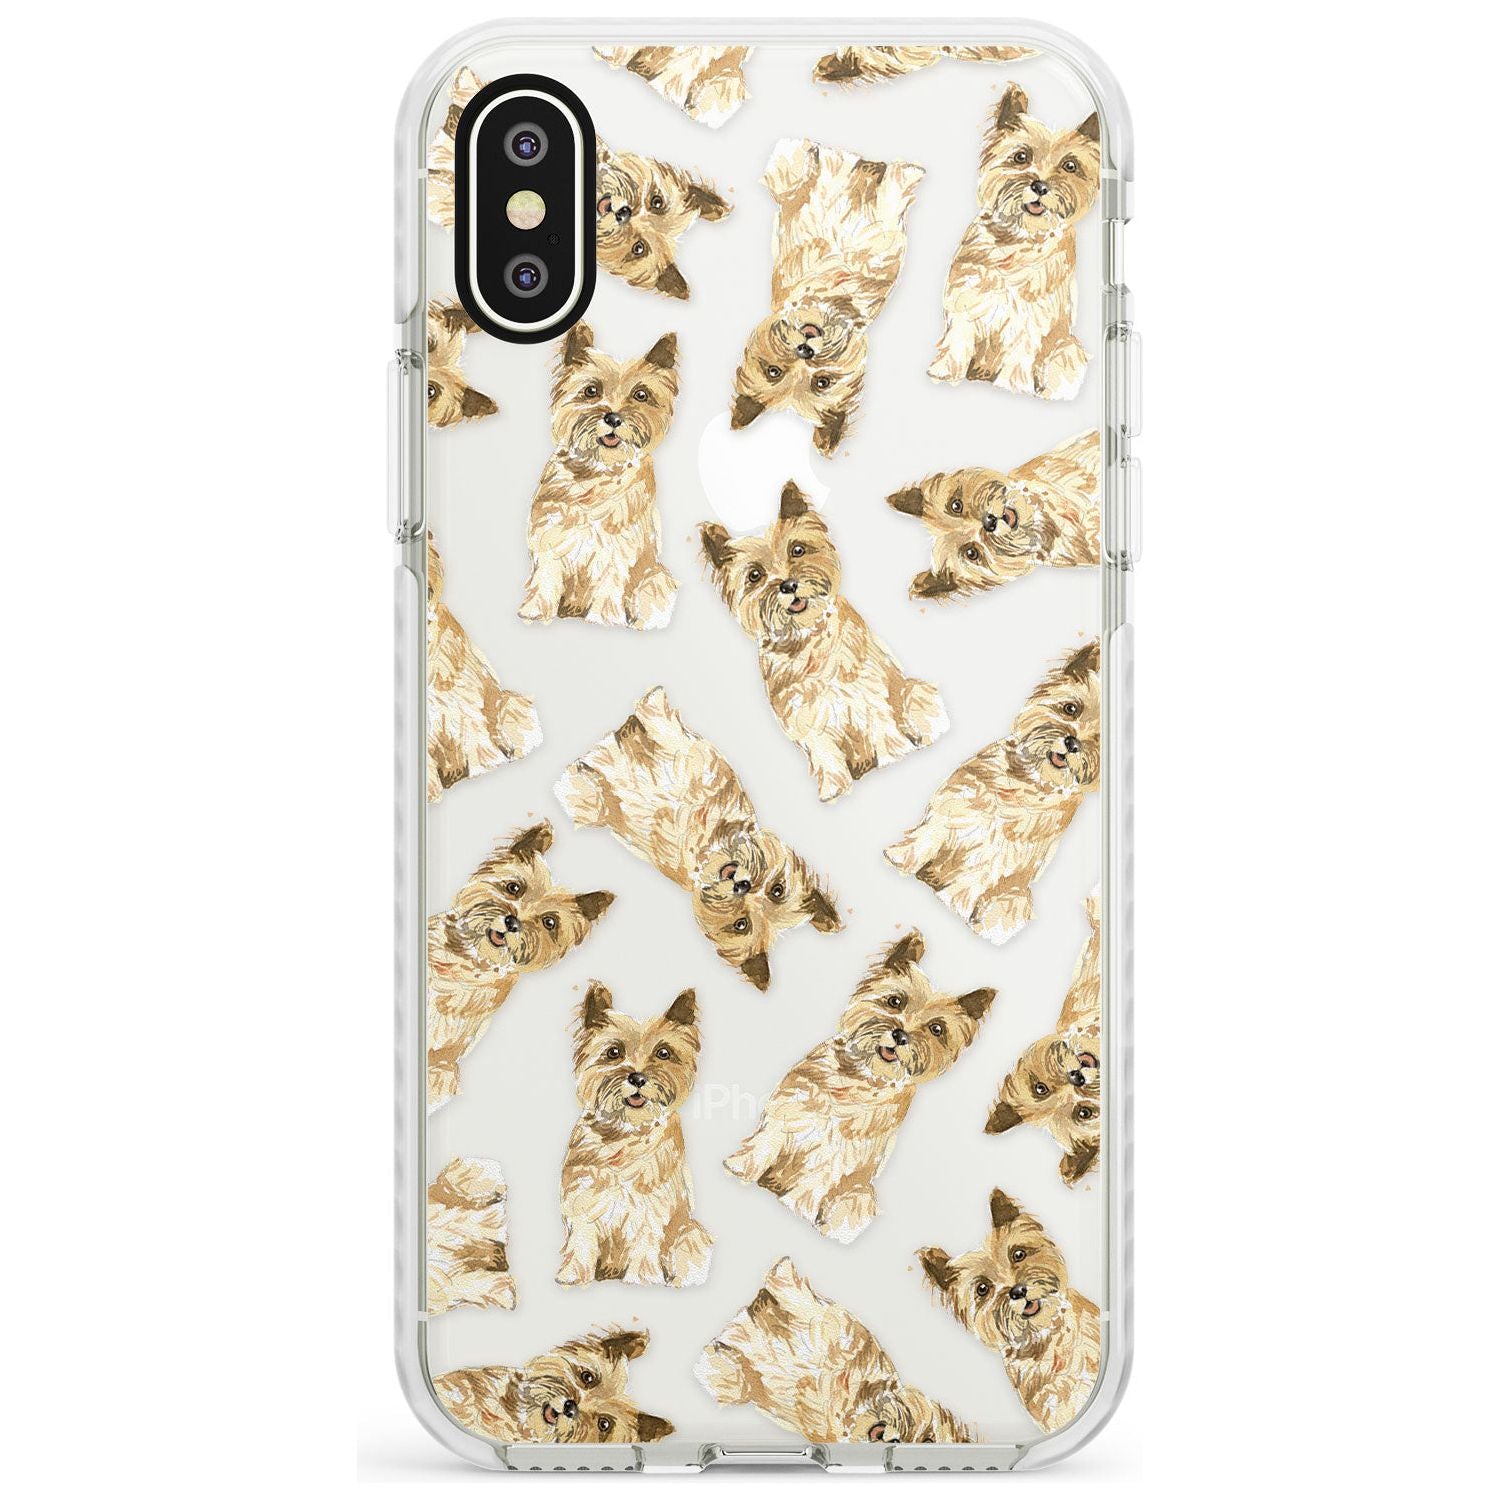 Cairn Terrier Watercolour Dog Pattern Impact Phone Case for iPhone X XS Max XR